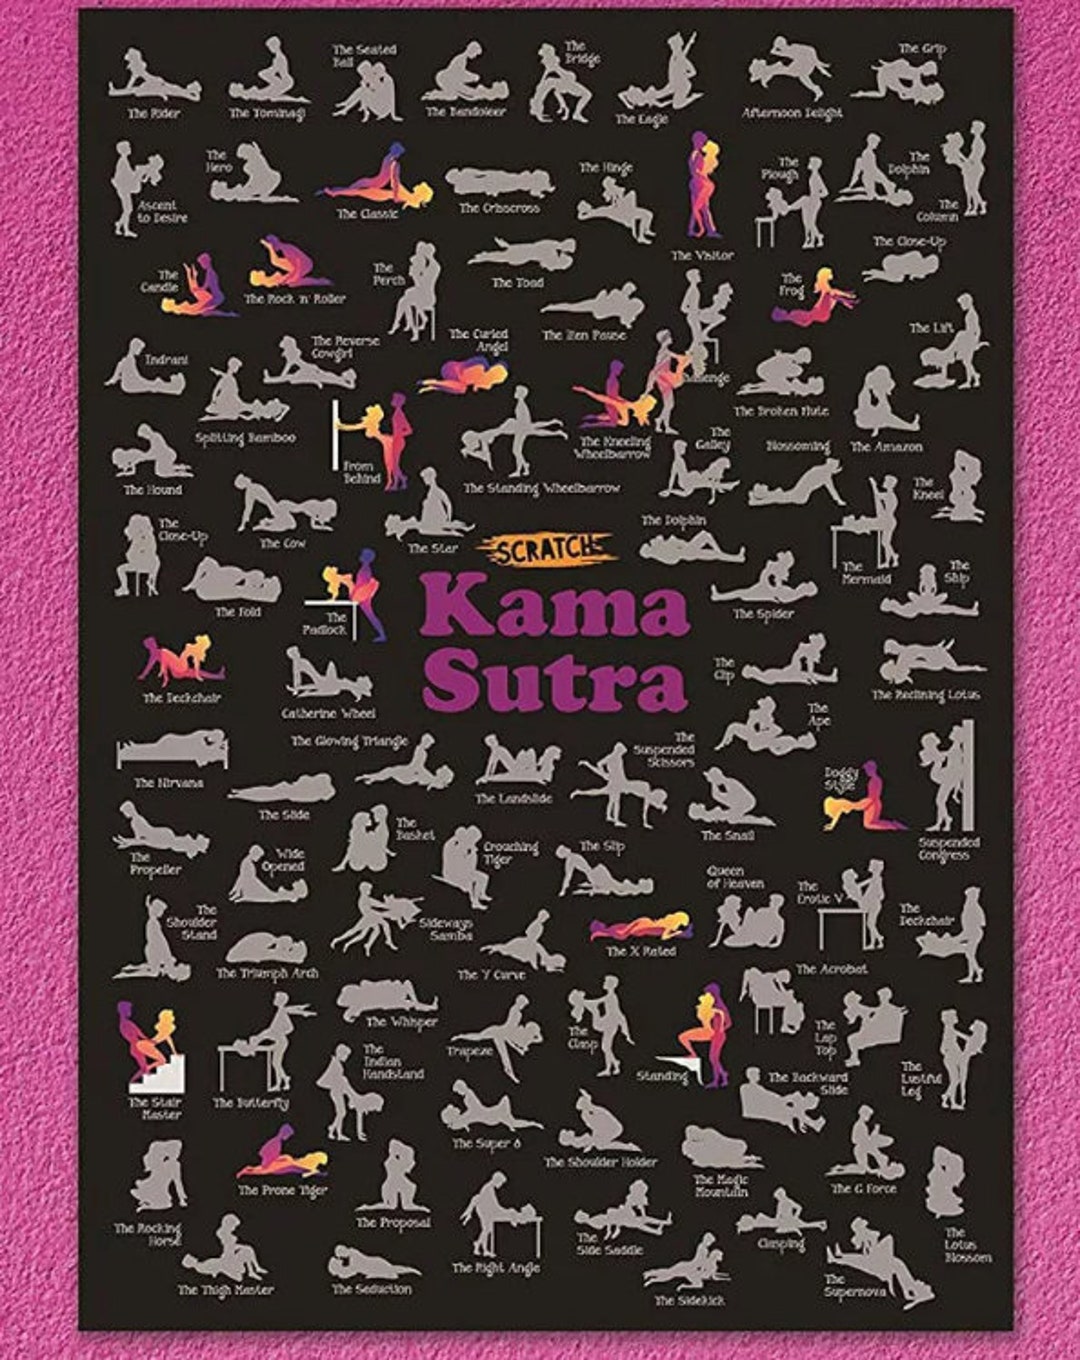 100 Kama Sutra Positions Scratch Poster 100 Sex Positions